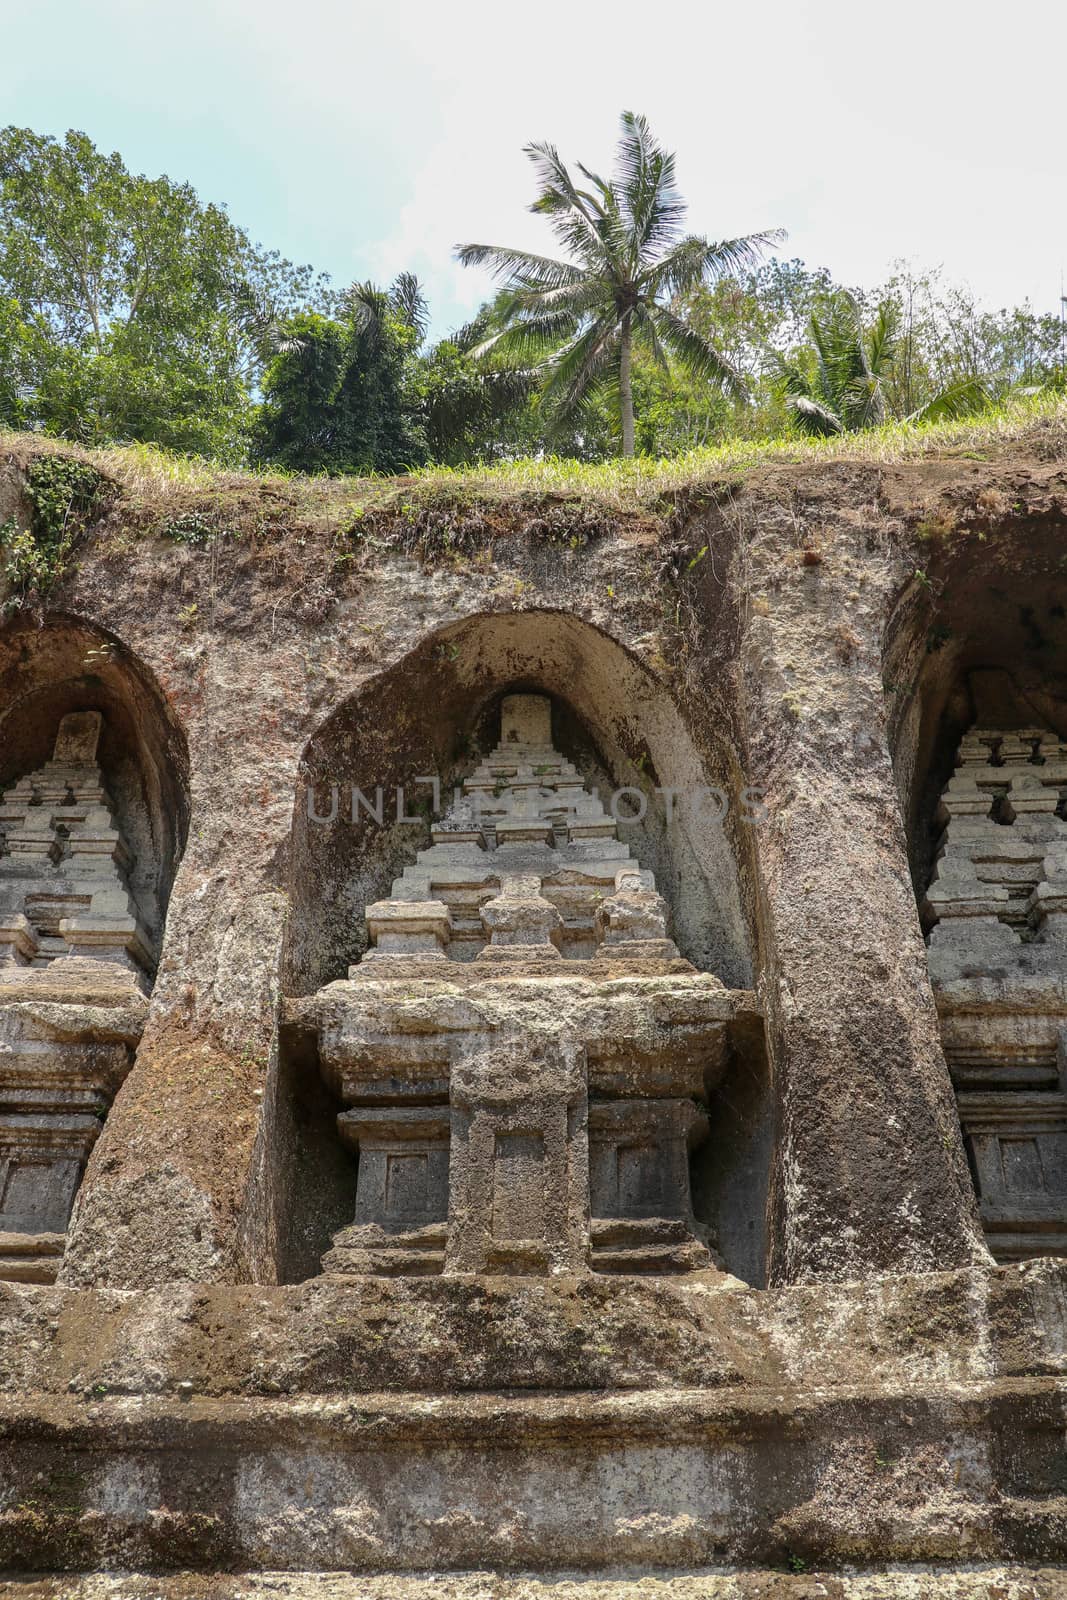 Candi (shrines) carved into a rock in a valley by the Pakerisan River. Gunung Kawi is an 11th-century temple and funerary complex in Tampaksiring northeast of Ubud in Bali, Indonesia.